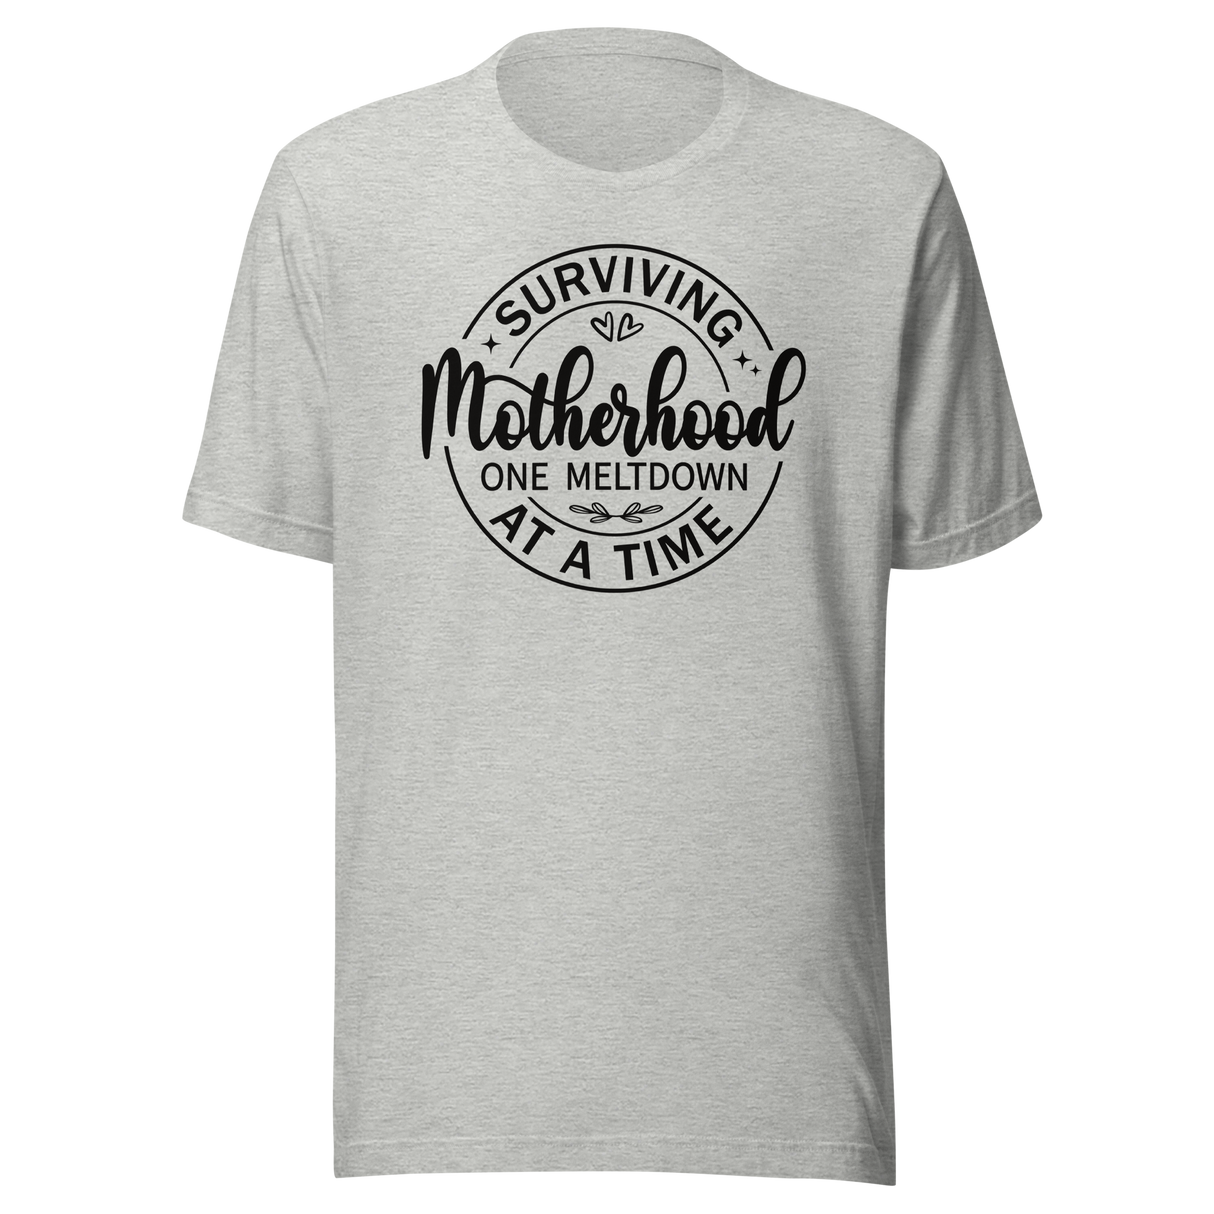 surviving-motherhood-one-meltdown-at-a-time-mom-tee-parents-t-shirt-mom-tee-motherhood-t-shirt-parenting-tee#color_athletic-heather